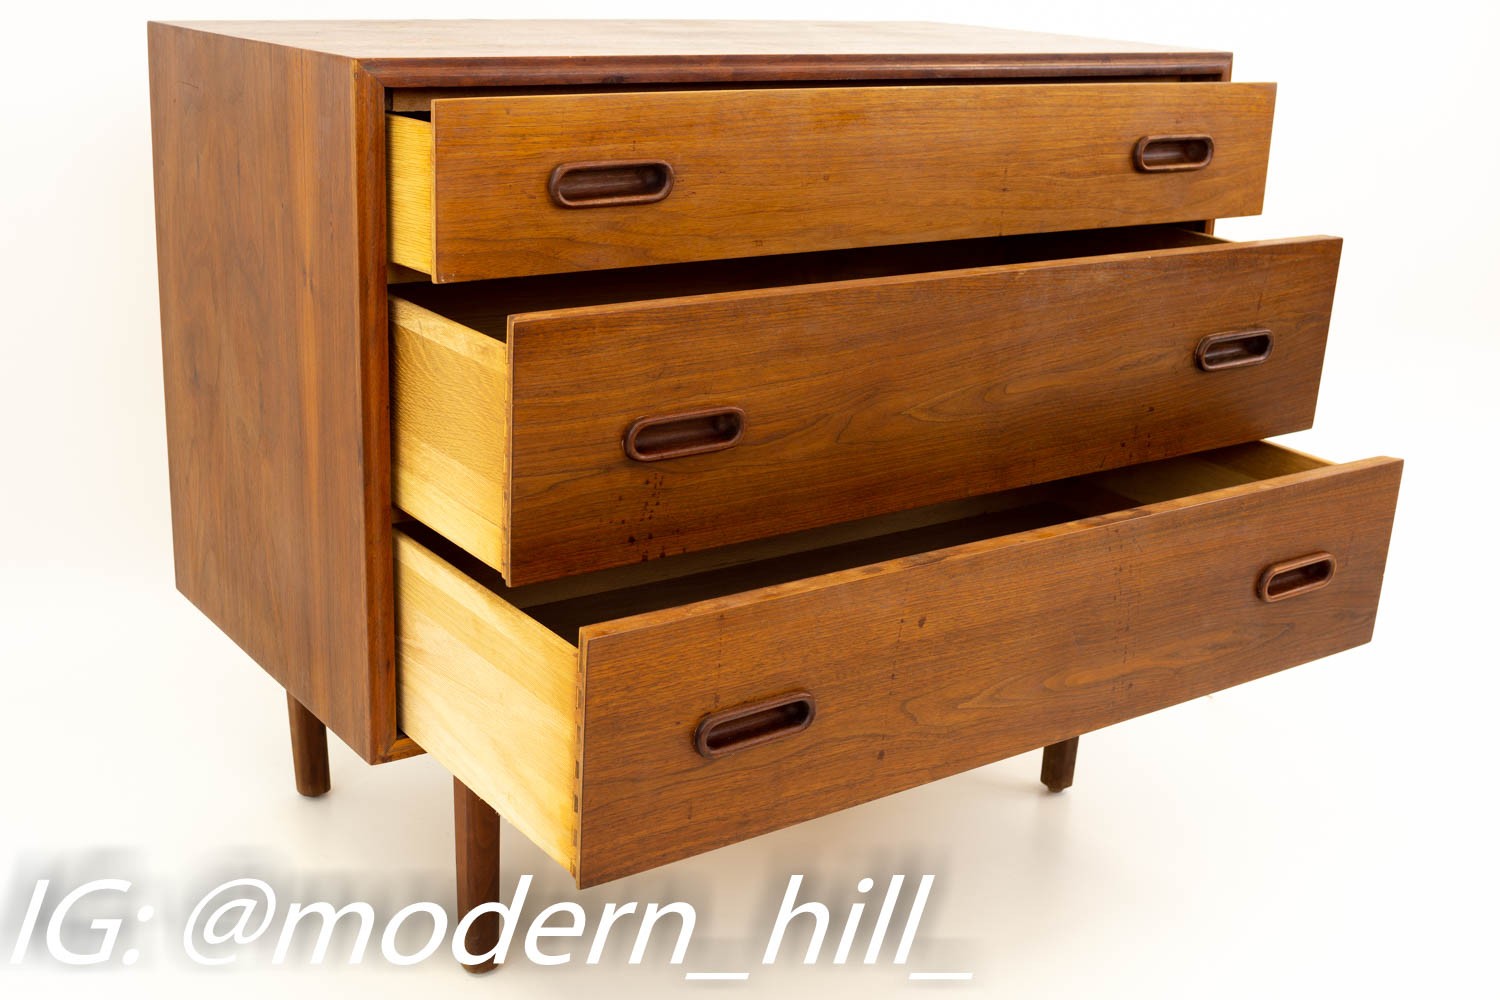 Jack Cartwright for Founders Mid Century Modern Danish Style 3 Drawer Chest of Drawers